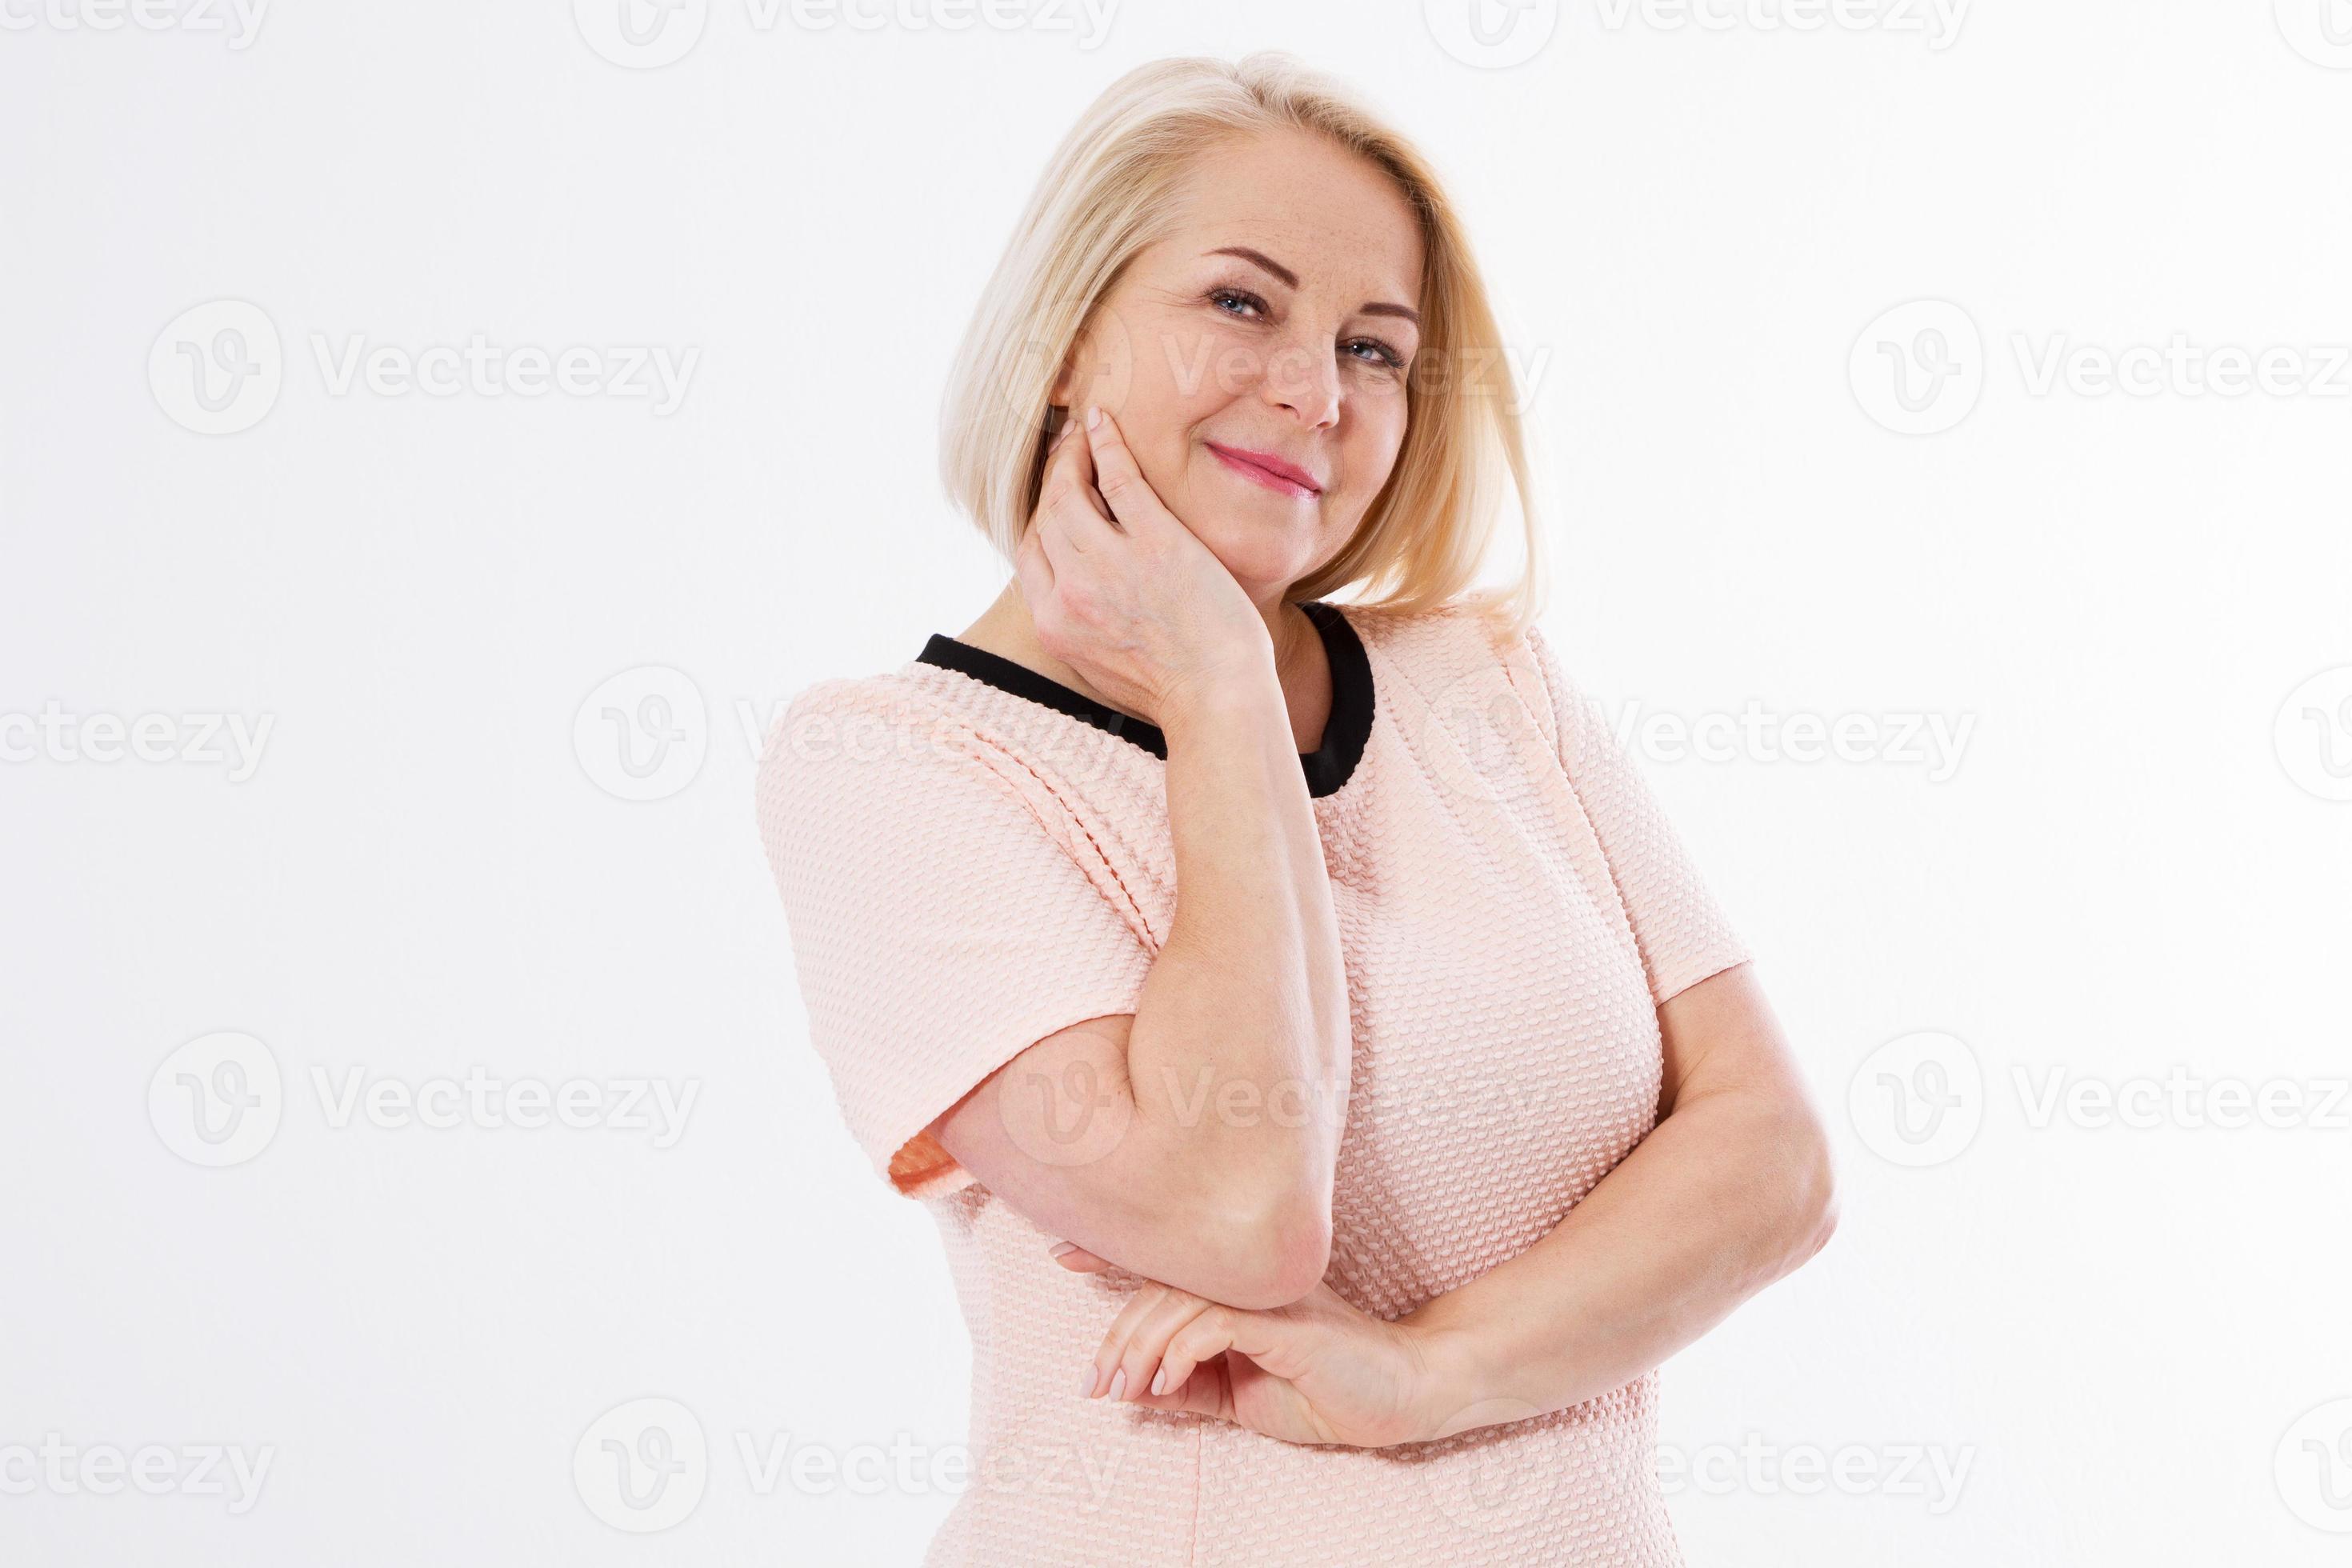 https://static.vecteezy.com/system/resources/previews/005/041/781/large_2x/middle-aged-woman-in-trendy-pink-clothing-smiling-at-you-studio-shot-smile-happy-middle-age-blonde-woman-copy-space-photo.JPG